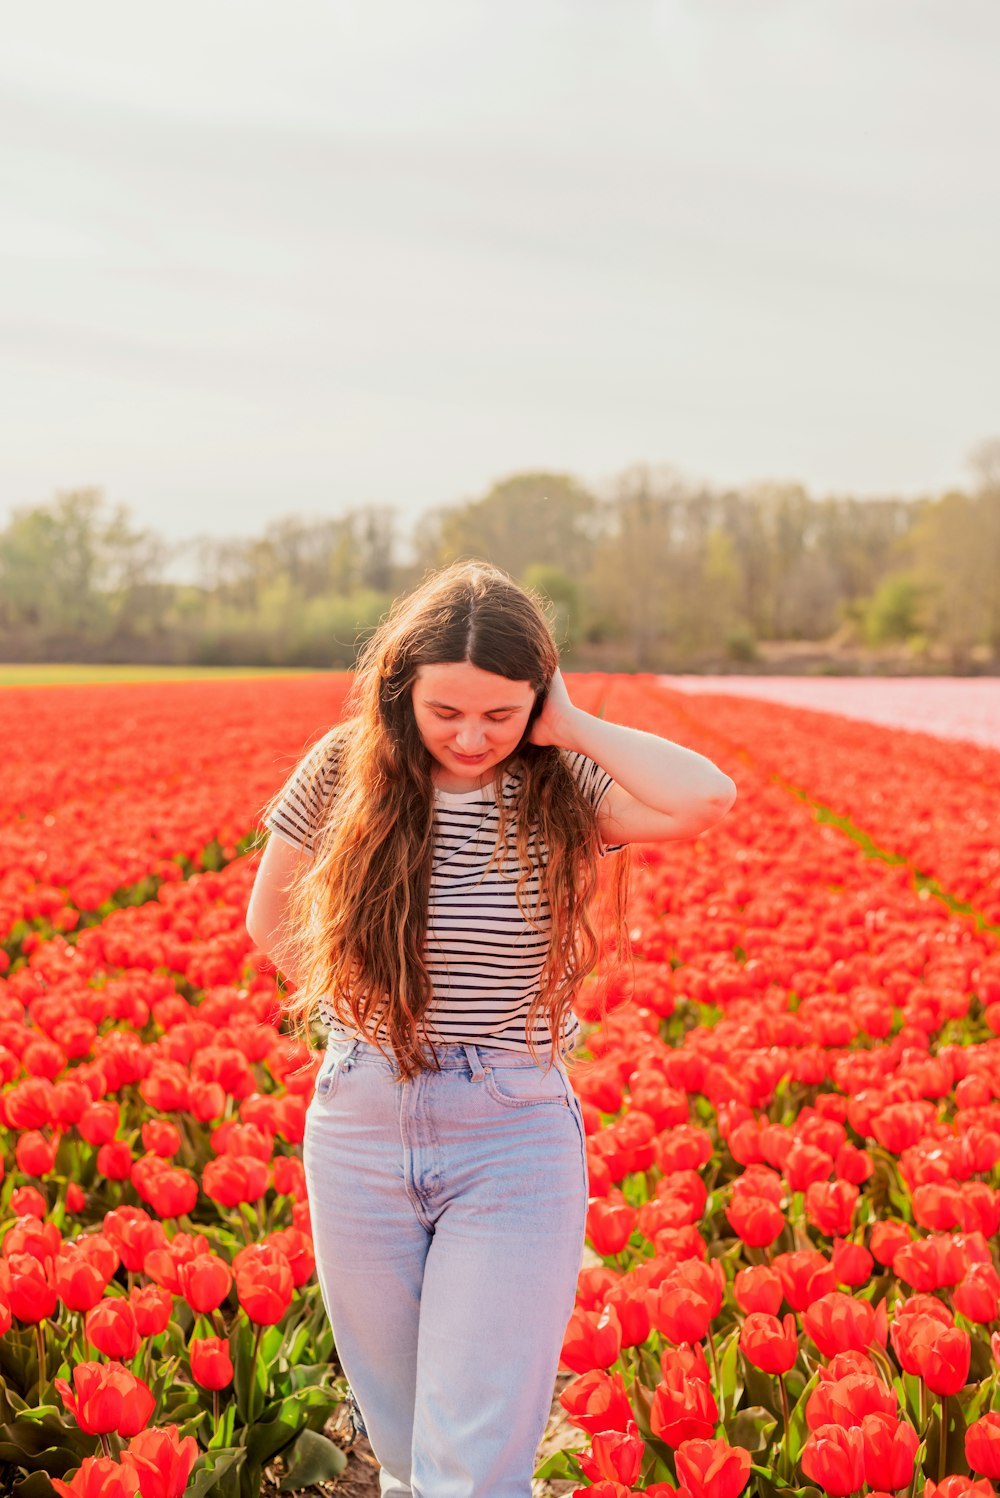 a person standing in a field of red flowers